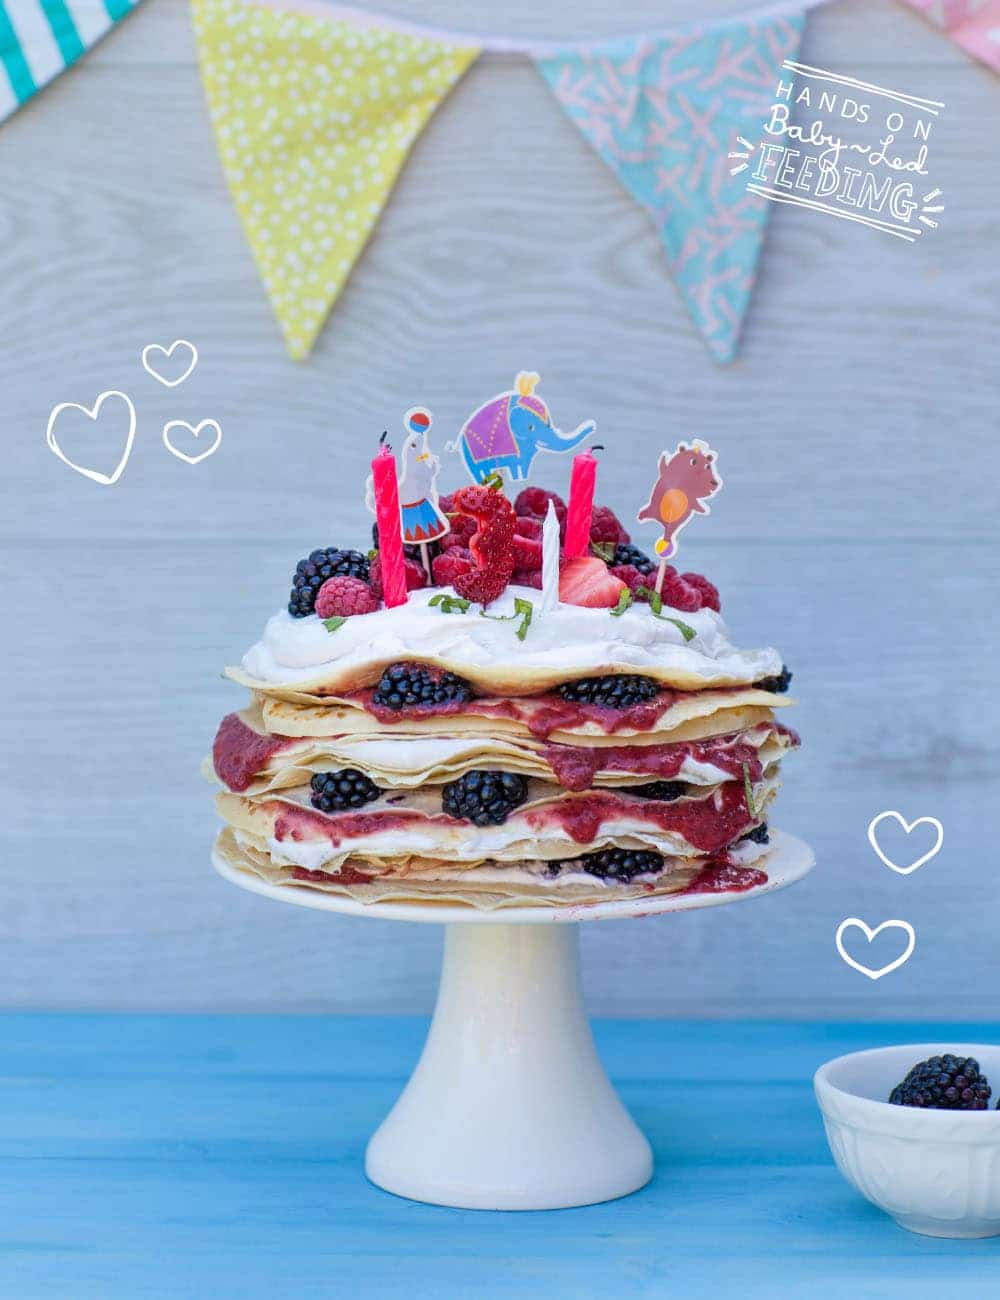 Super cute breakfast for baby led weaning. Full cake image for Oscars birthday breakfast. Baby Birthday cake from Baby led feeding. Oscars birthday cake for baby led weaning. This pancake cake is staked full of berries, coconut ice cream and raspberry chia jam. Completely refined sugar free blw recipe for baby birthday cake. These pancakes are full of yummy goodness. Packed with nutrients and goodness. From Aileen Cox Blundell Baby Led Feeding Cookbook.